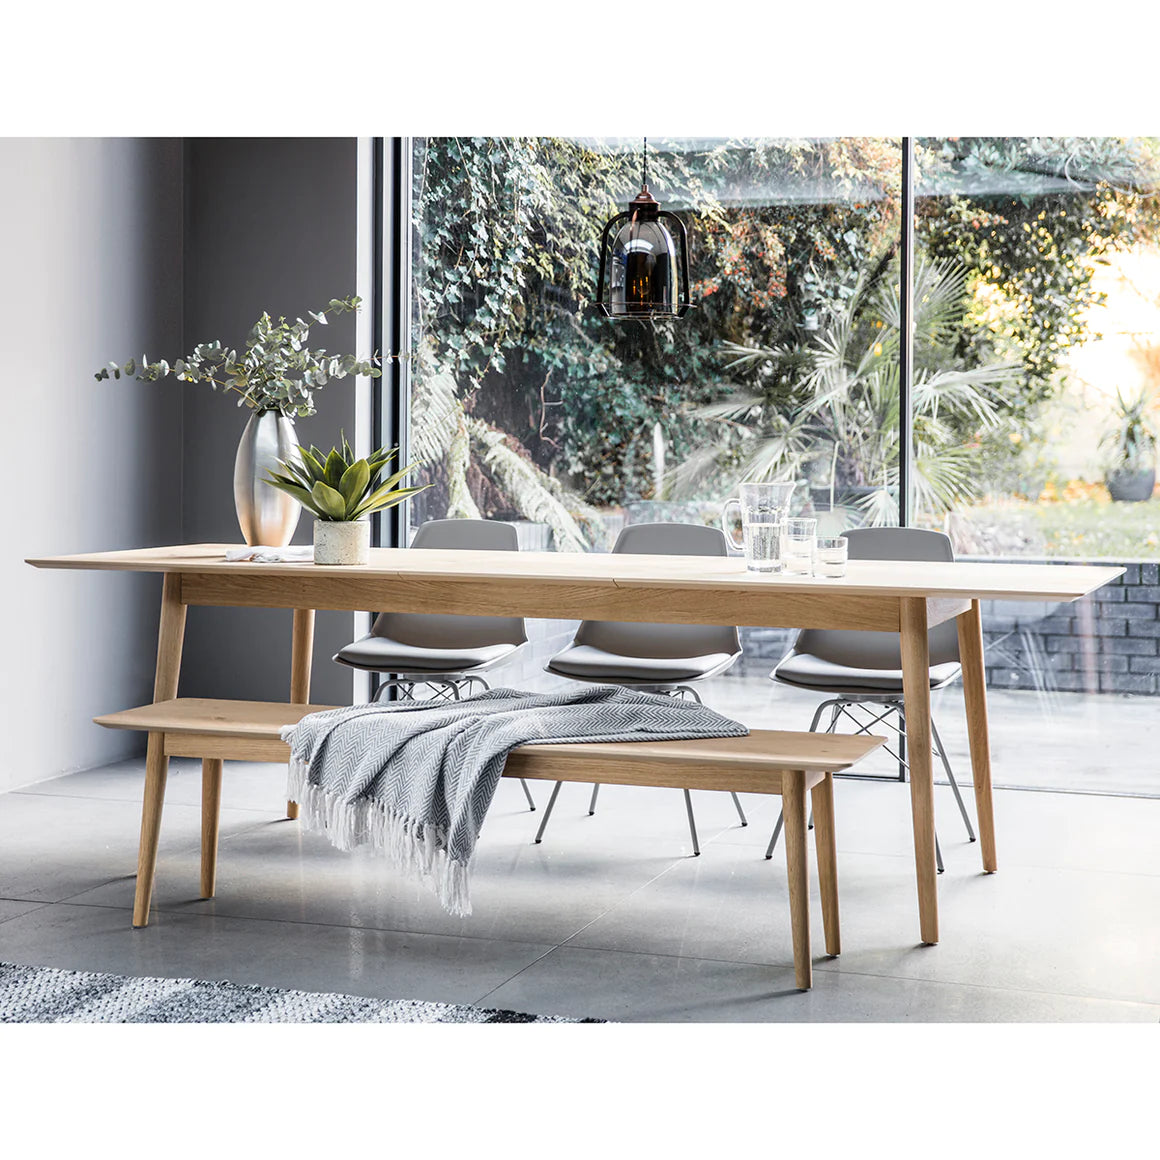 What is Nordic Furniture Style - Get the look with wood and leather